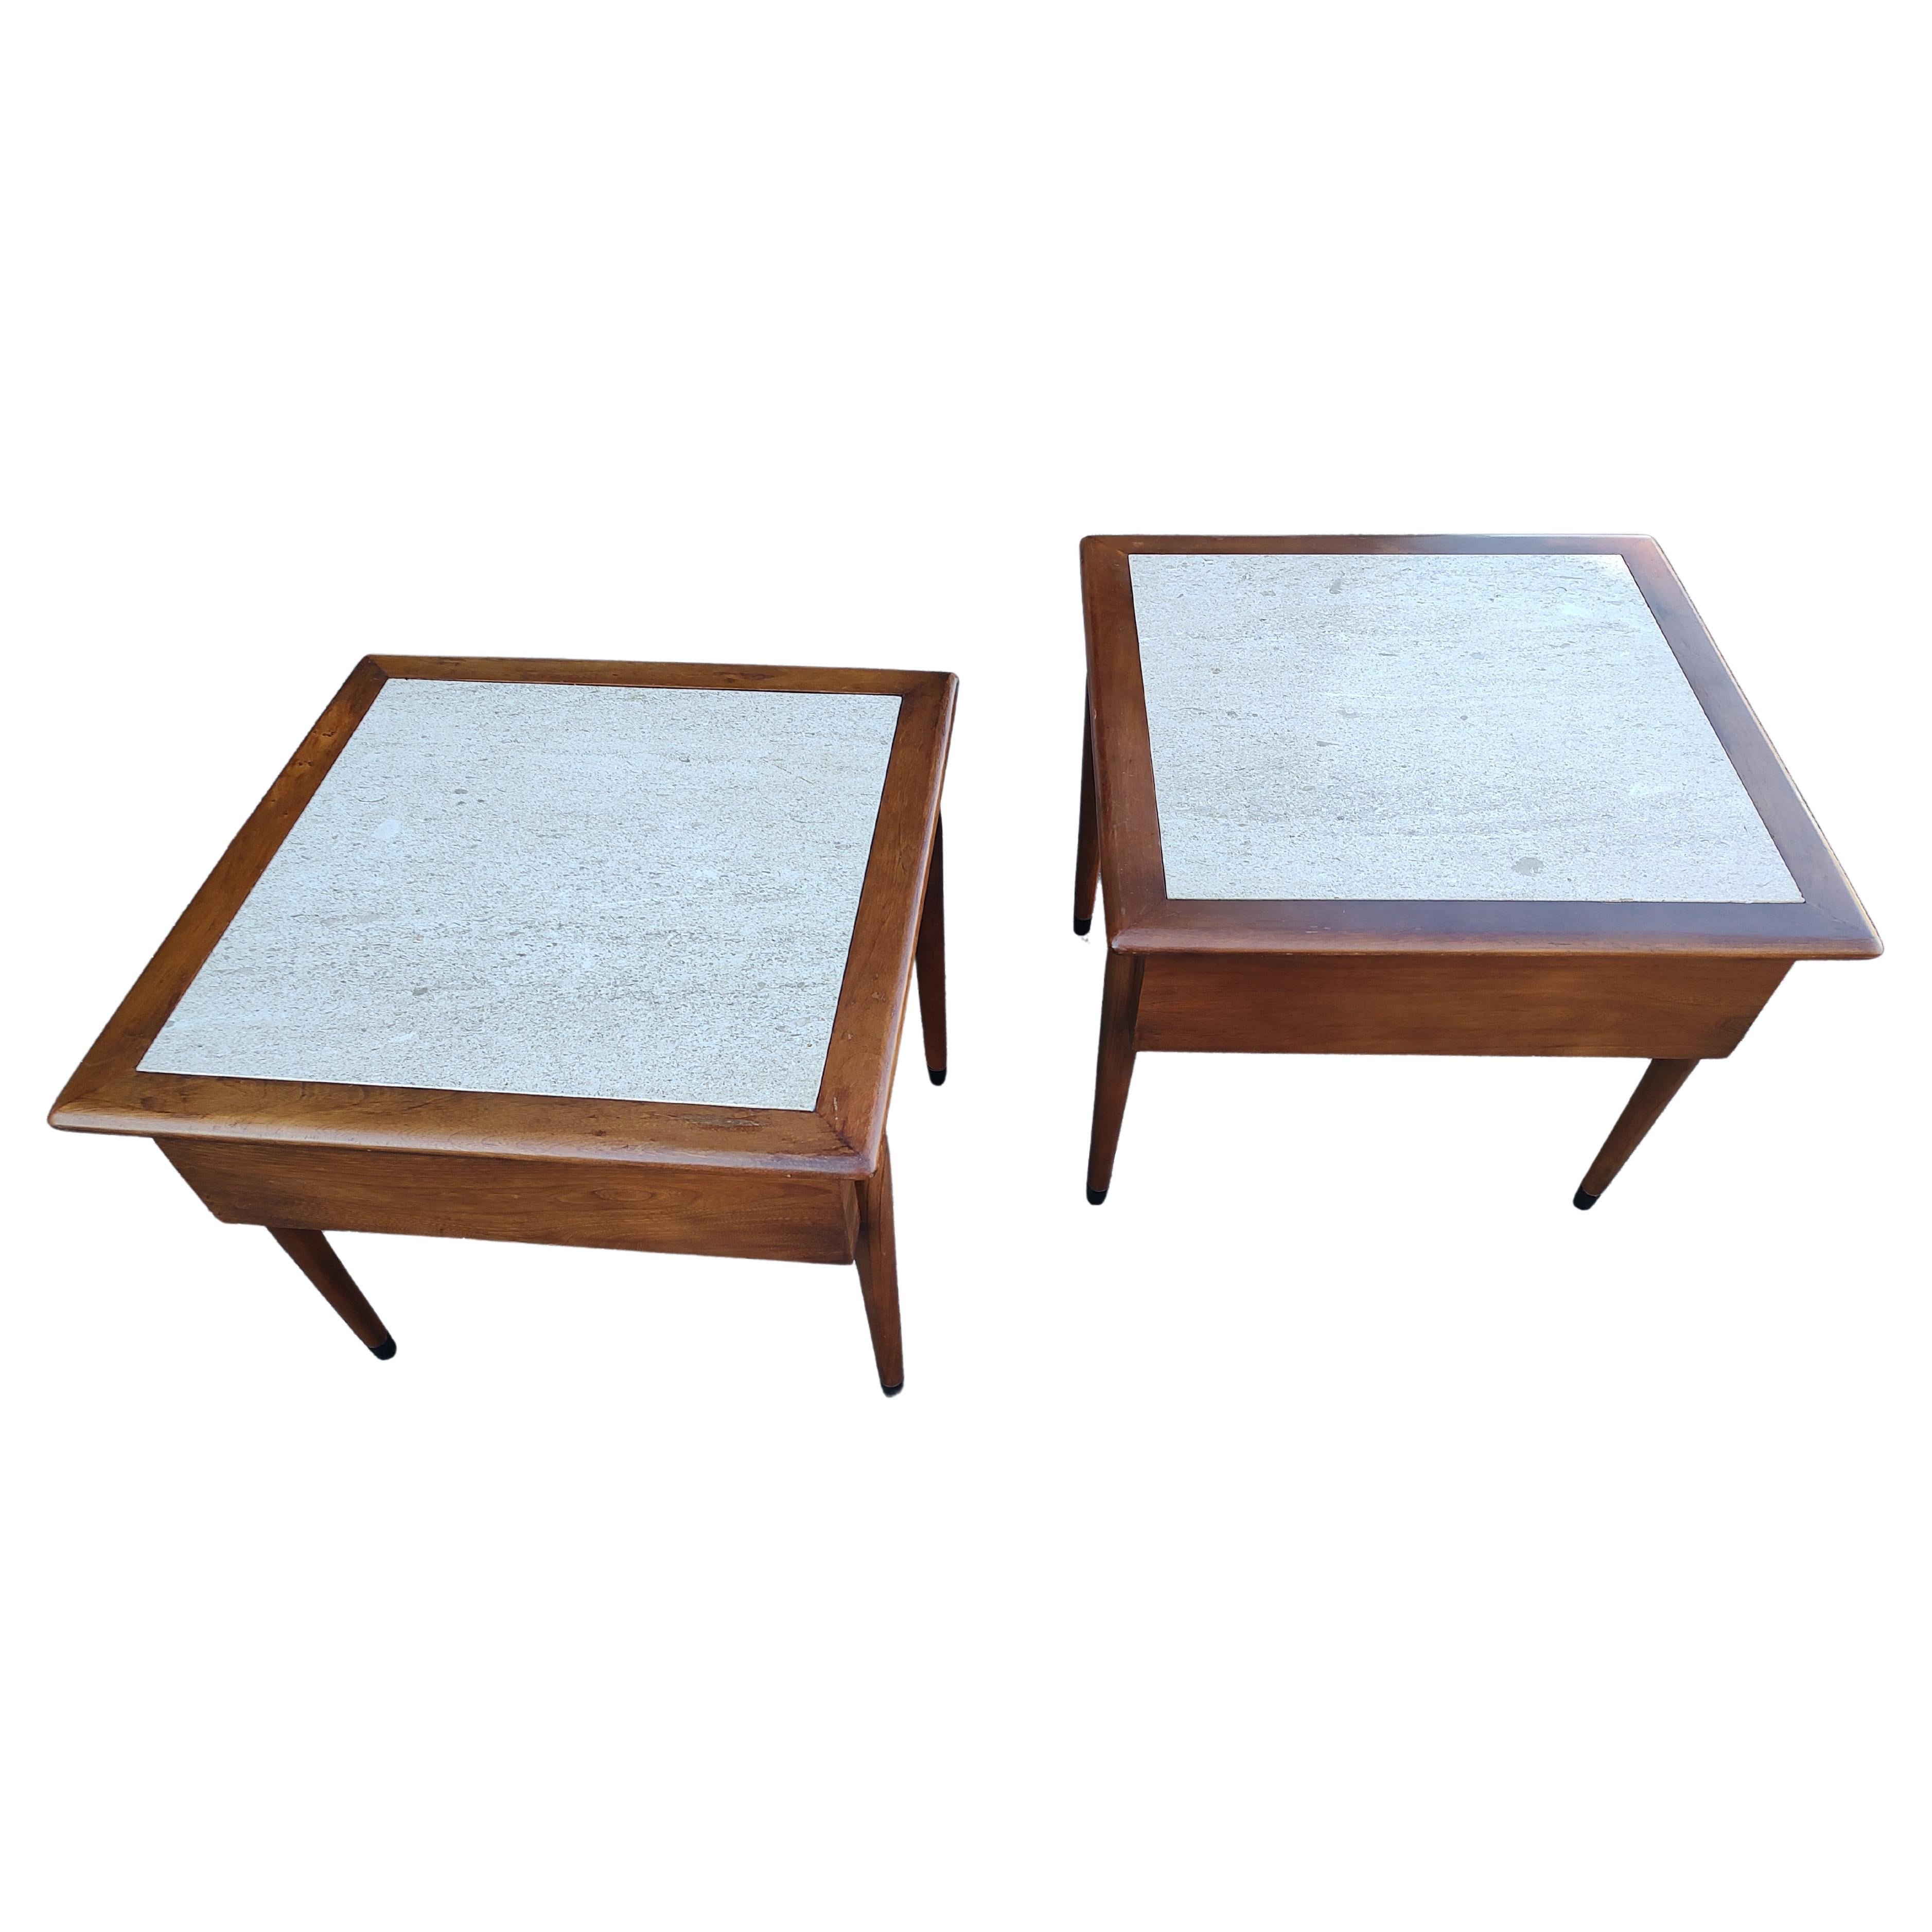 Pair of Mid Century Modern Lane Perception End Tables with Travertine Tops C1960 In Good Condition For Sale In Port Jervis, NY